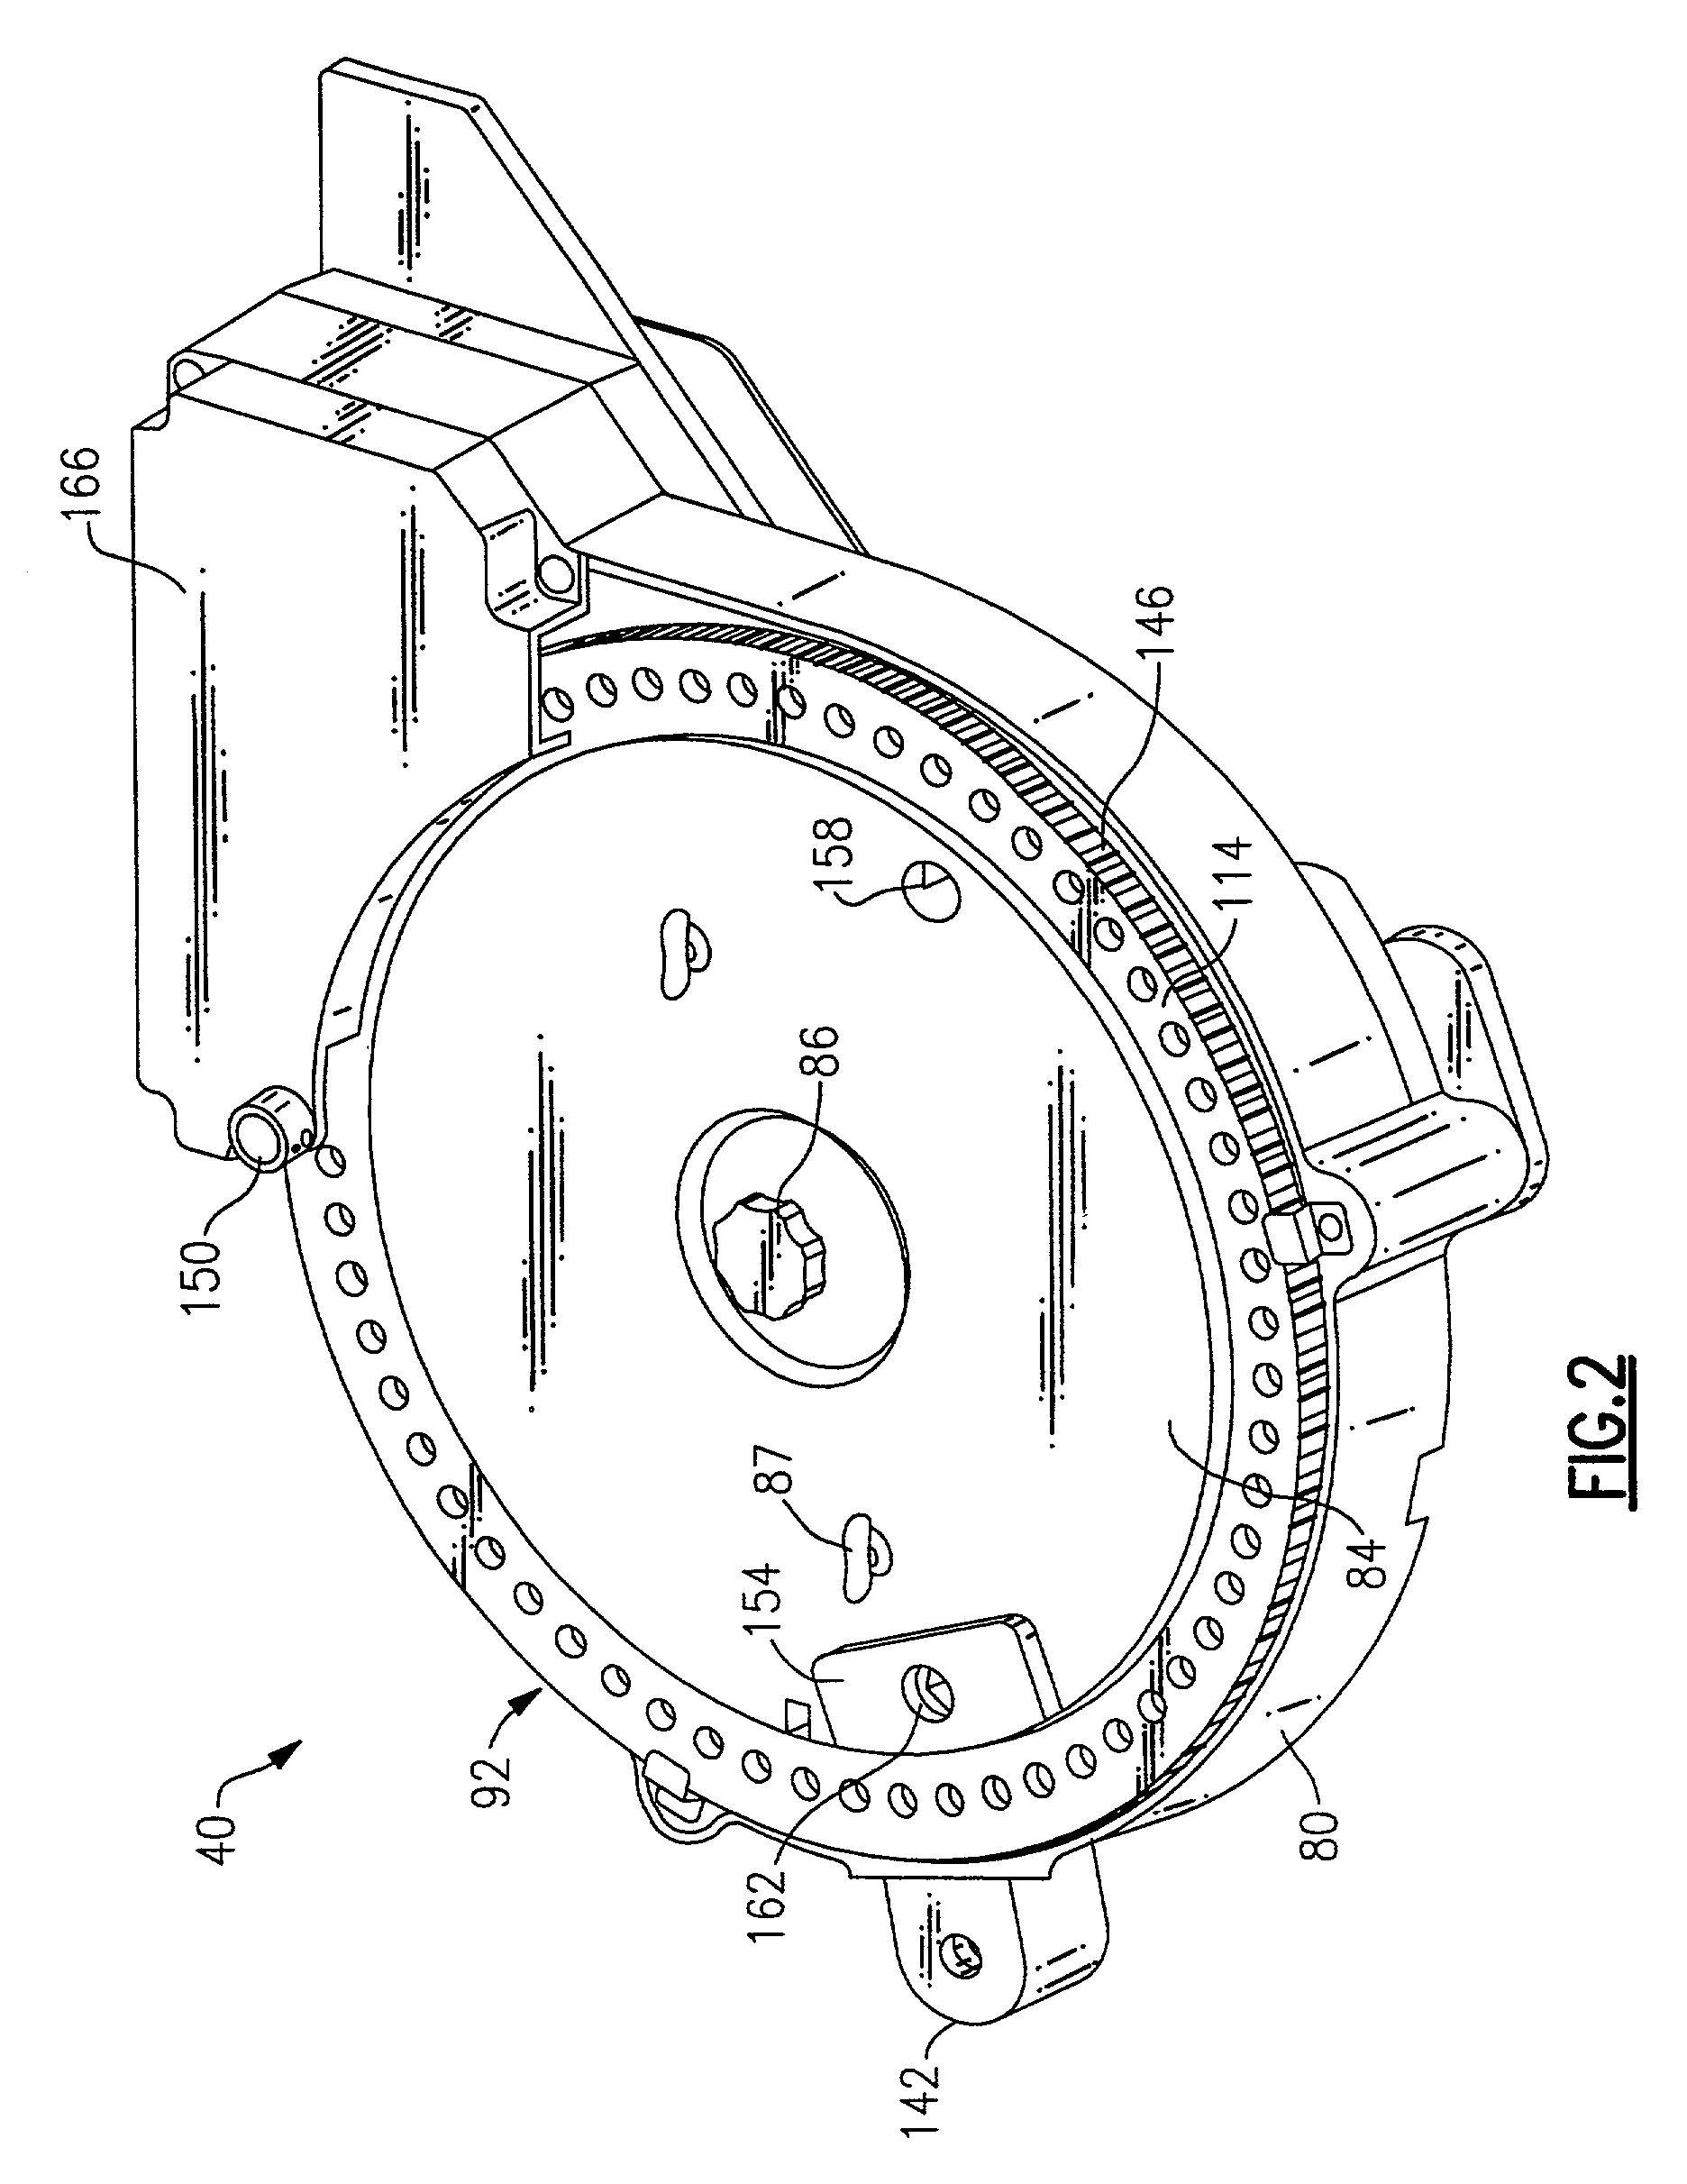 Auxiliary sample supply for a clinical analyzer